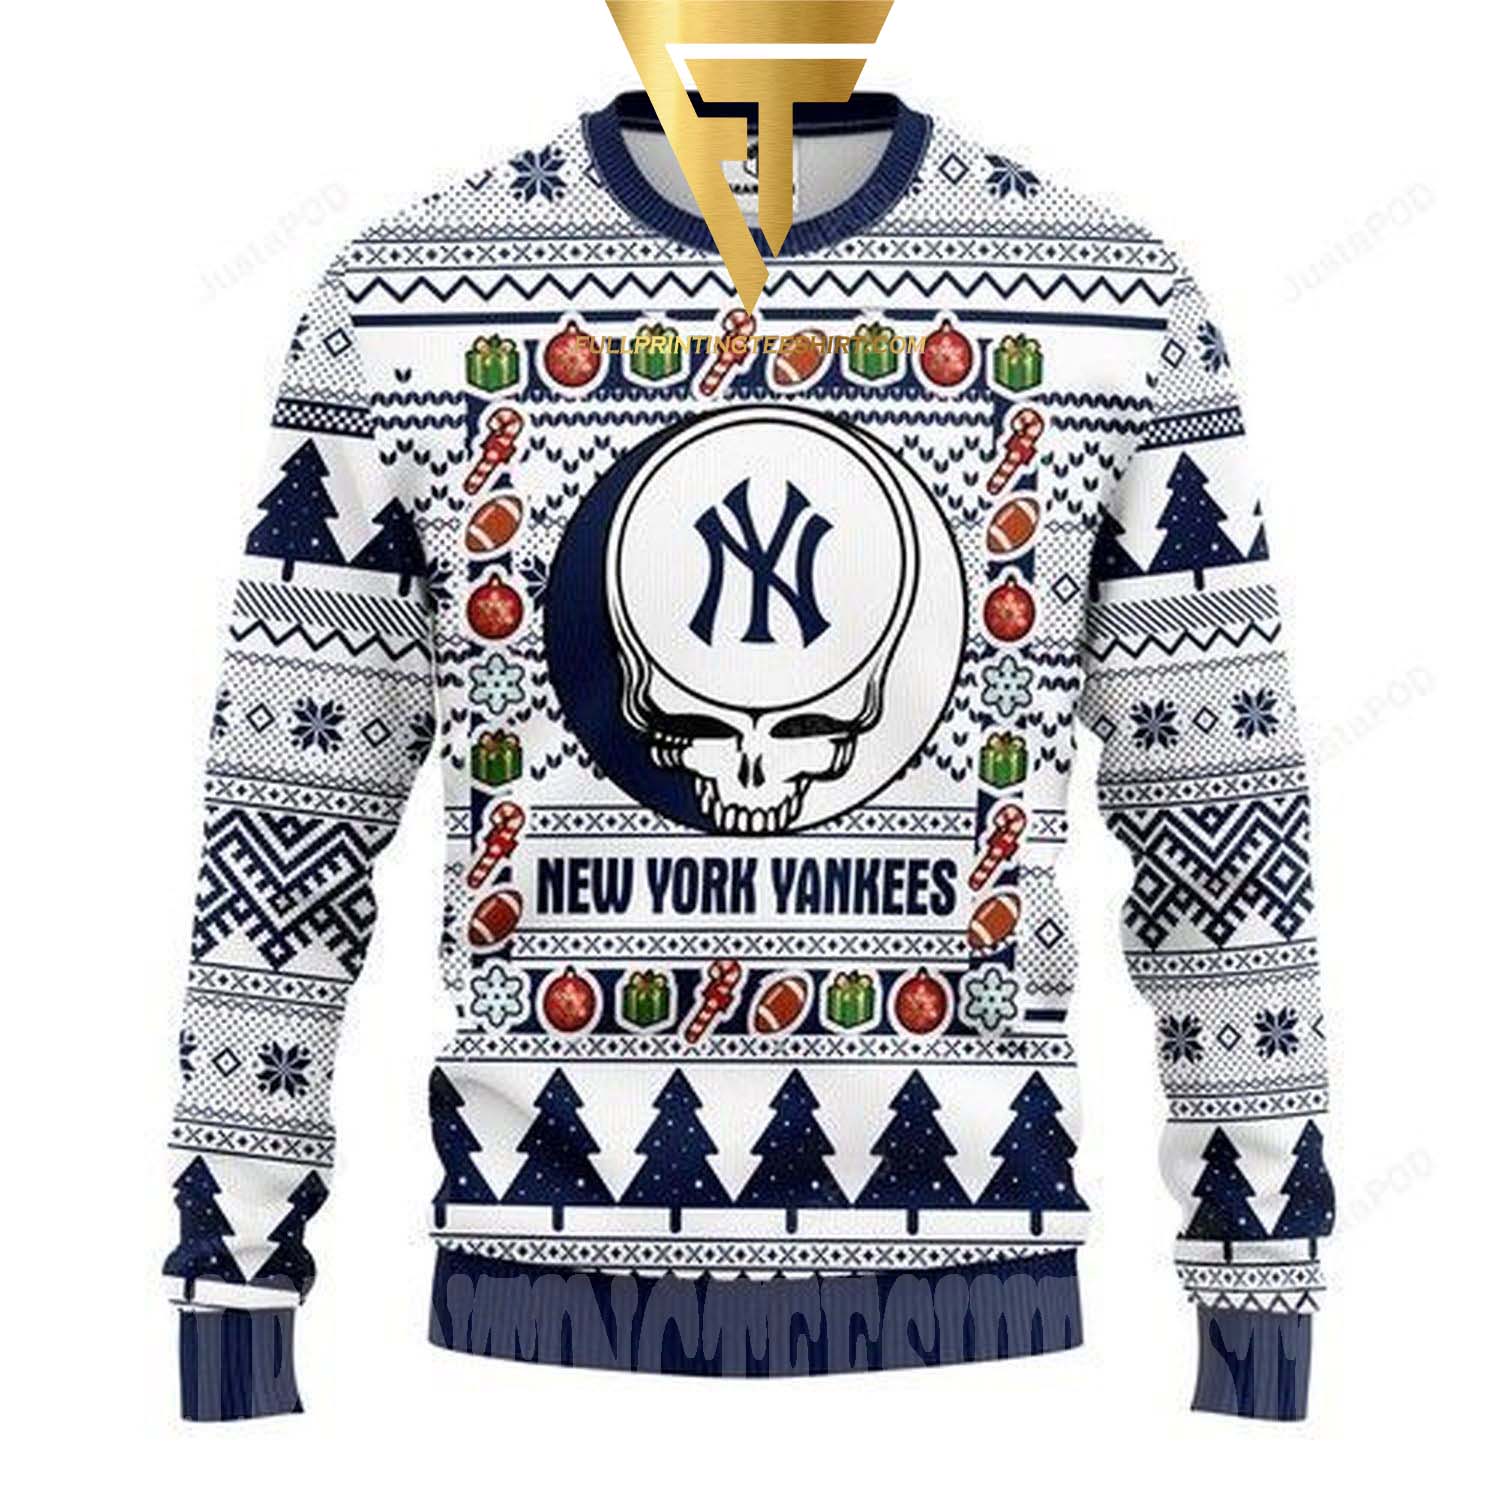 Top-selling item] MLB New York Yankees Grateful Dead Ugly Christmas Sweater